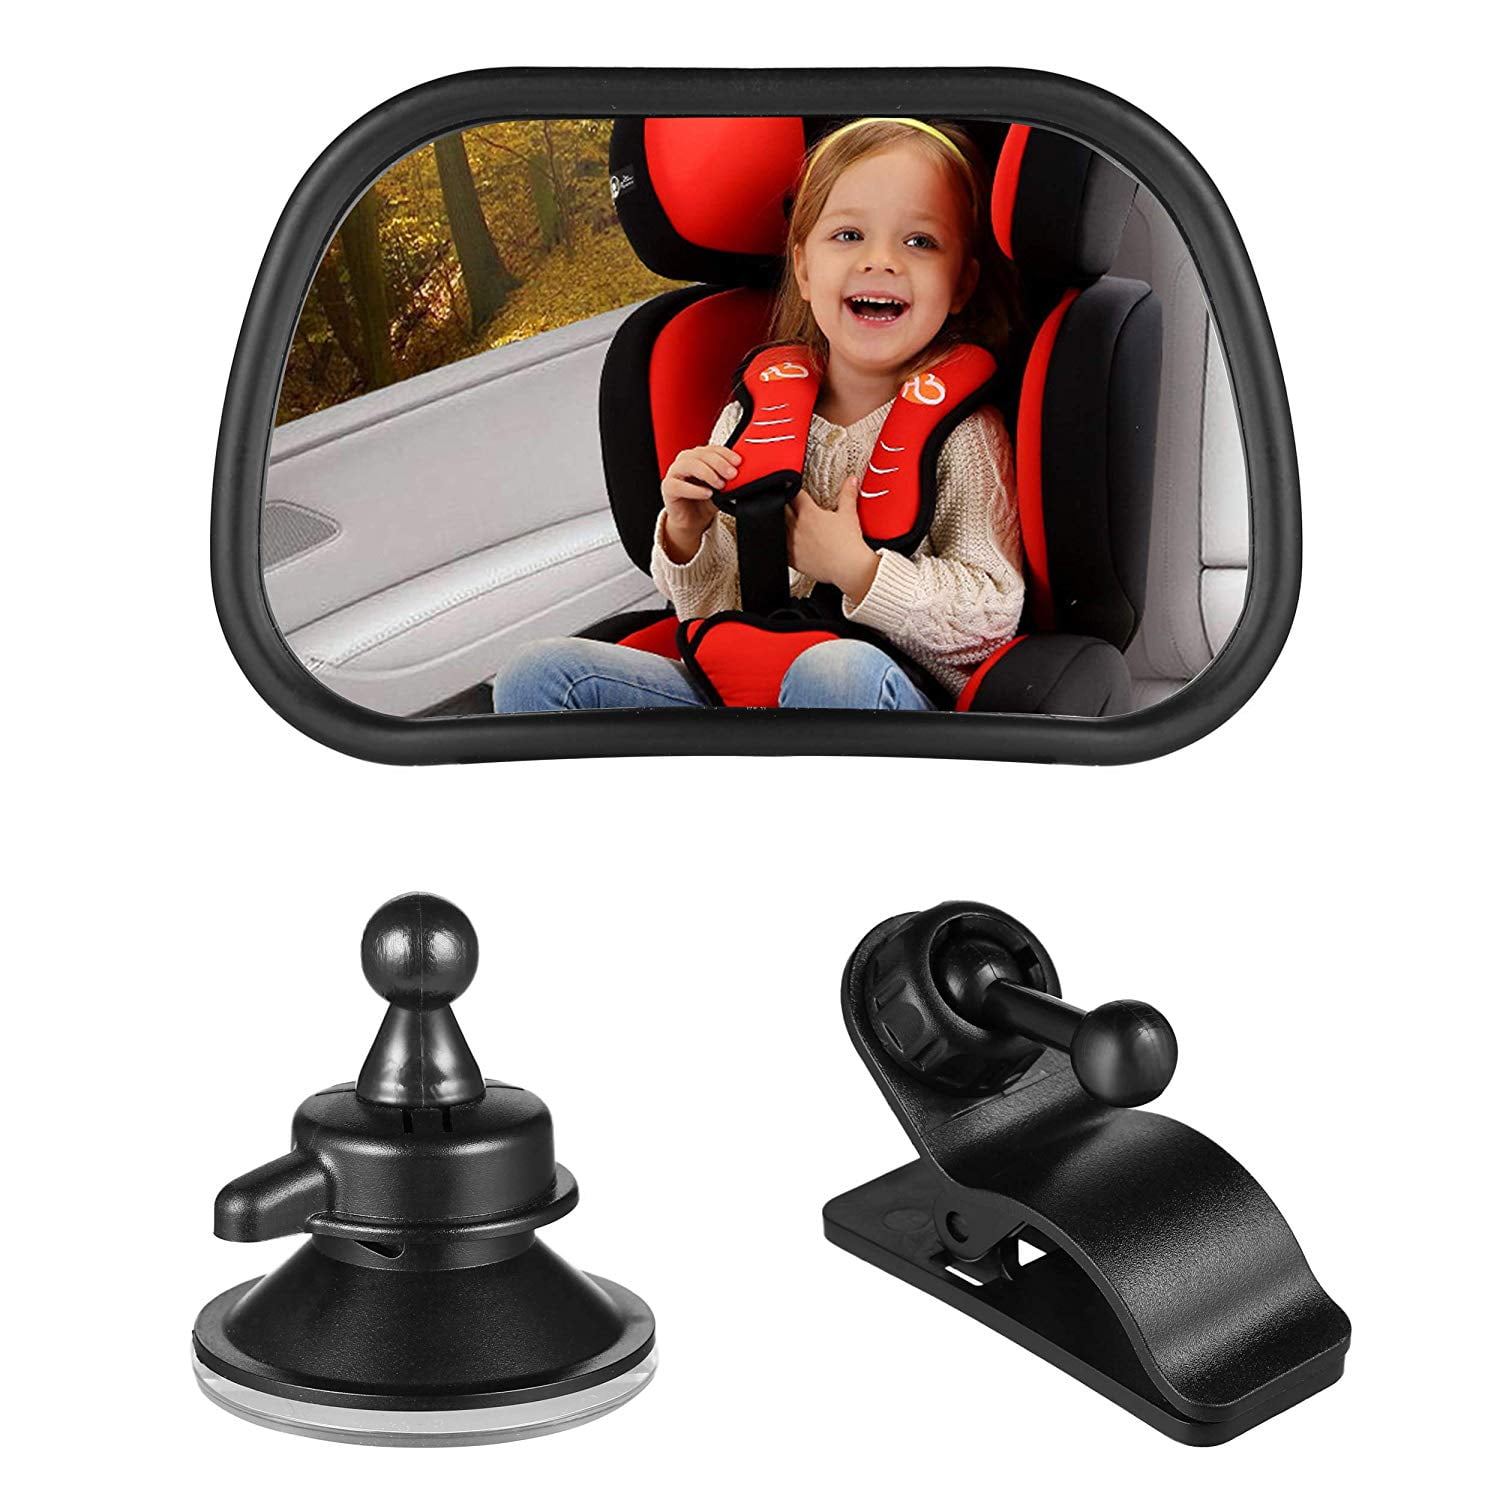 ZogeeZ Baby Rear View Mirror Car Seat Safety for Infant Child Toddler Viewing Suction Cup or Clip On Visor